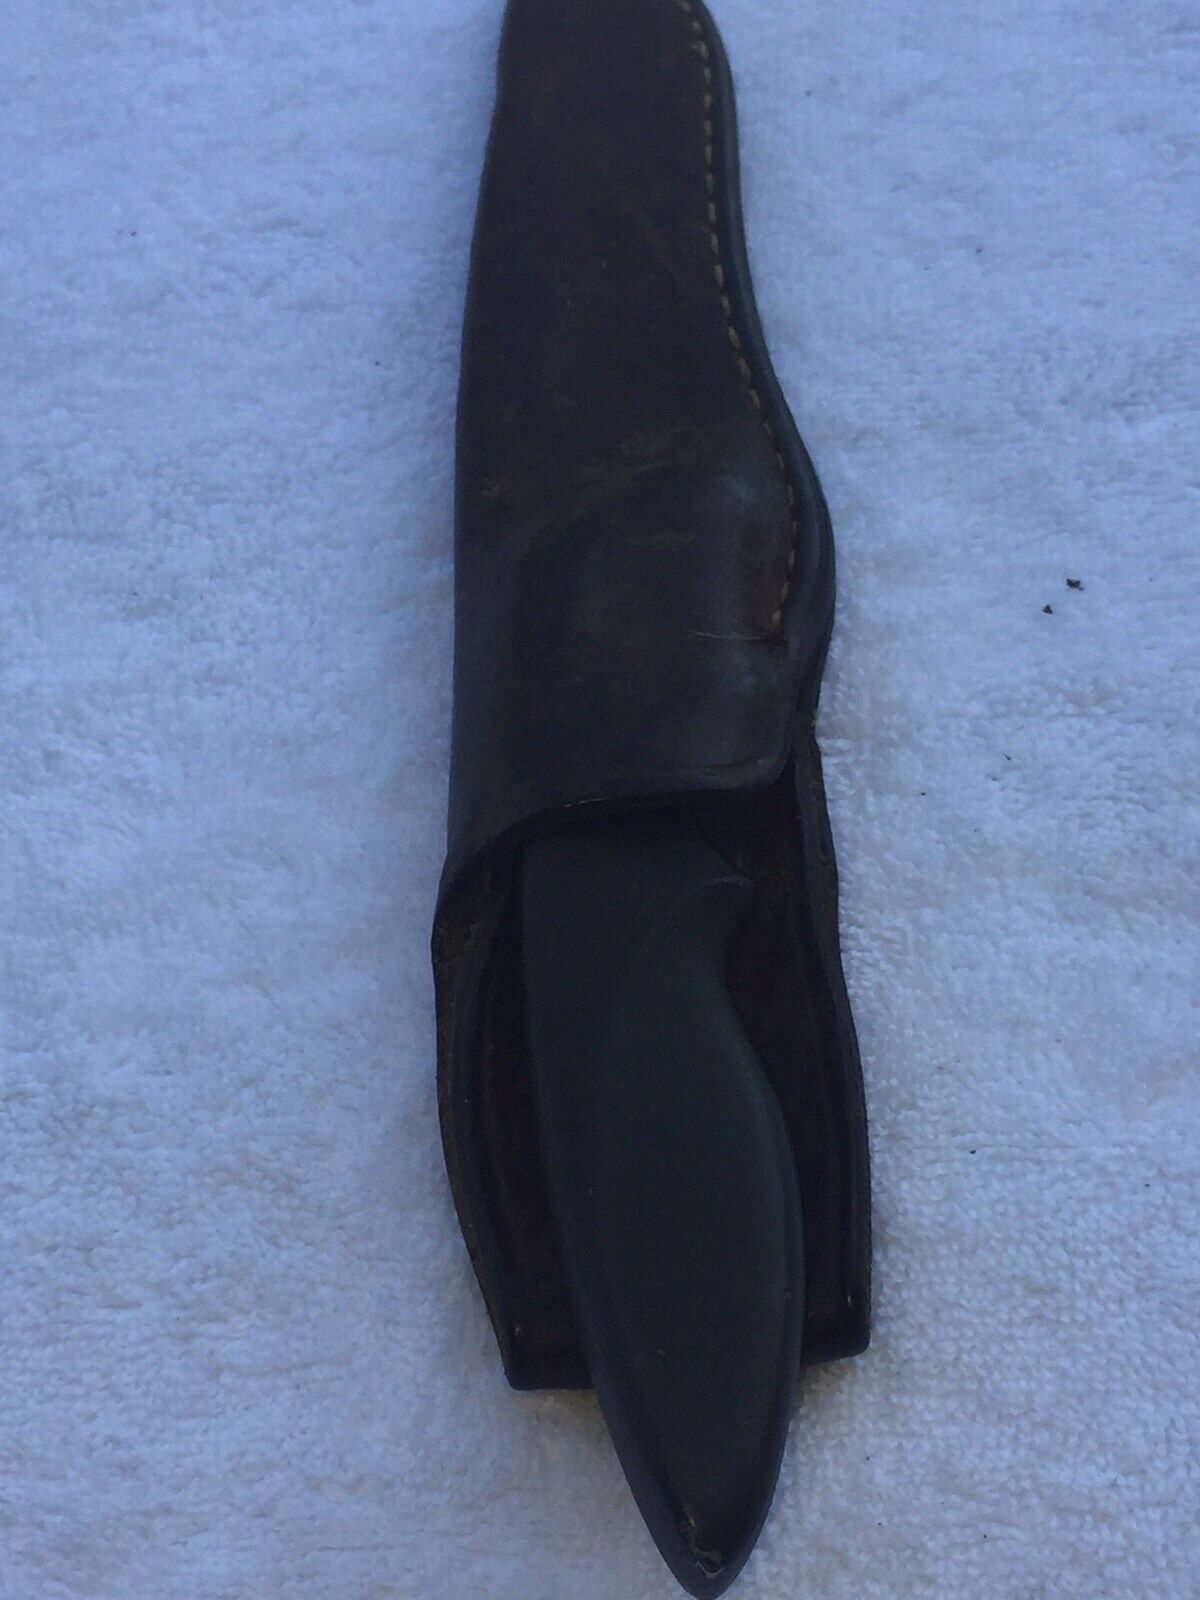 Vintage Gerber Mini-magnum Hunting Fixed Blade Knife W/Sheath Made In Usa